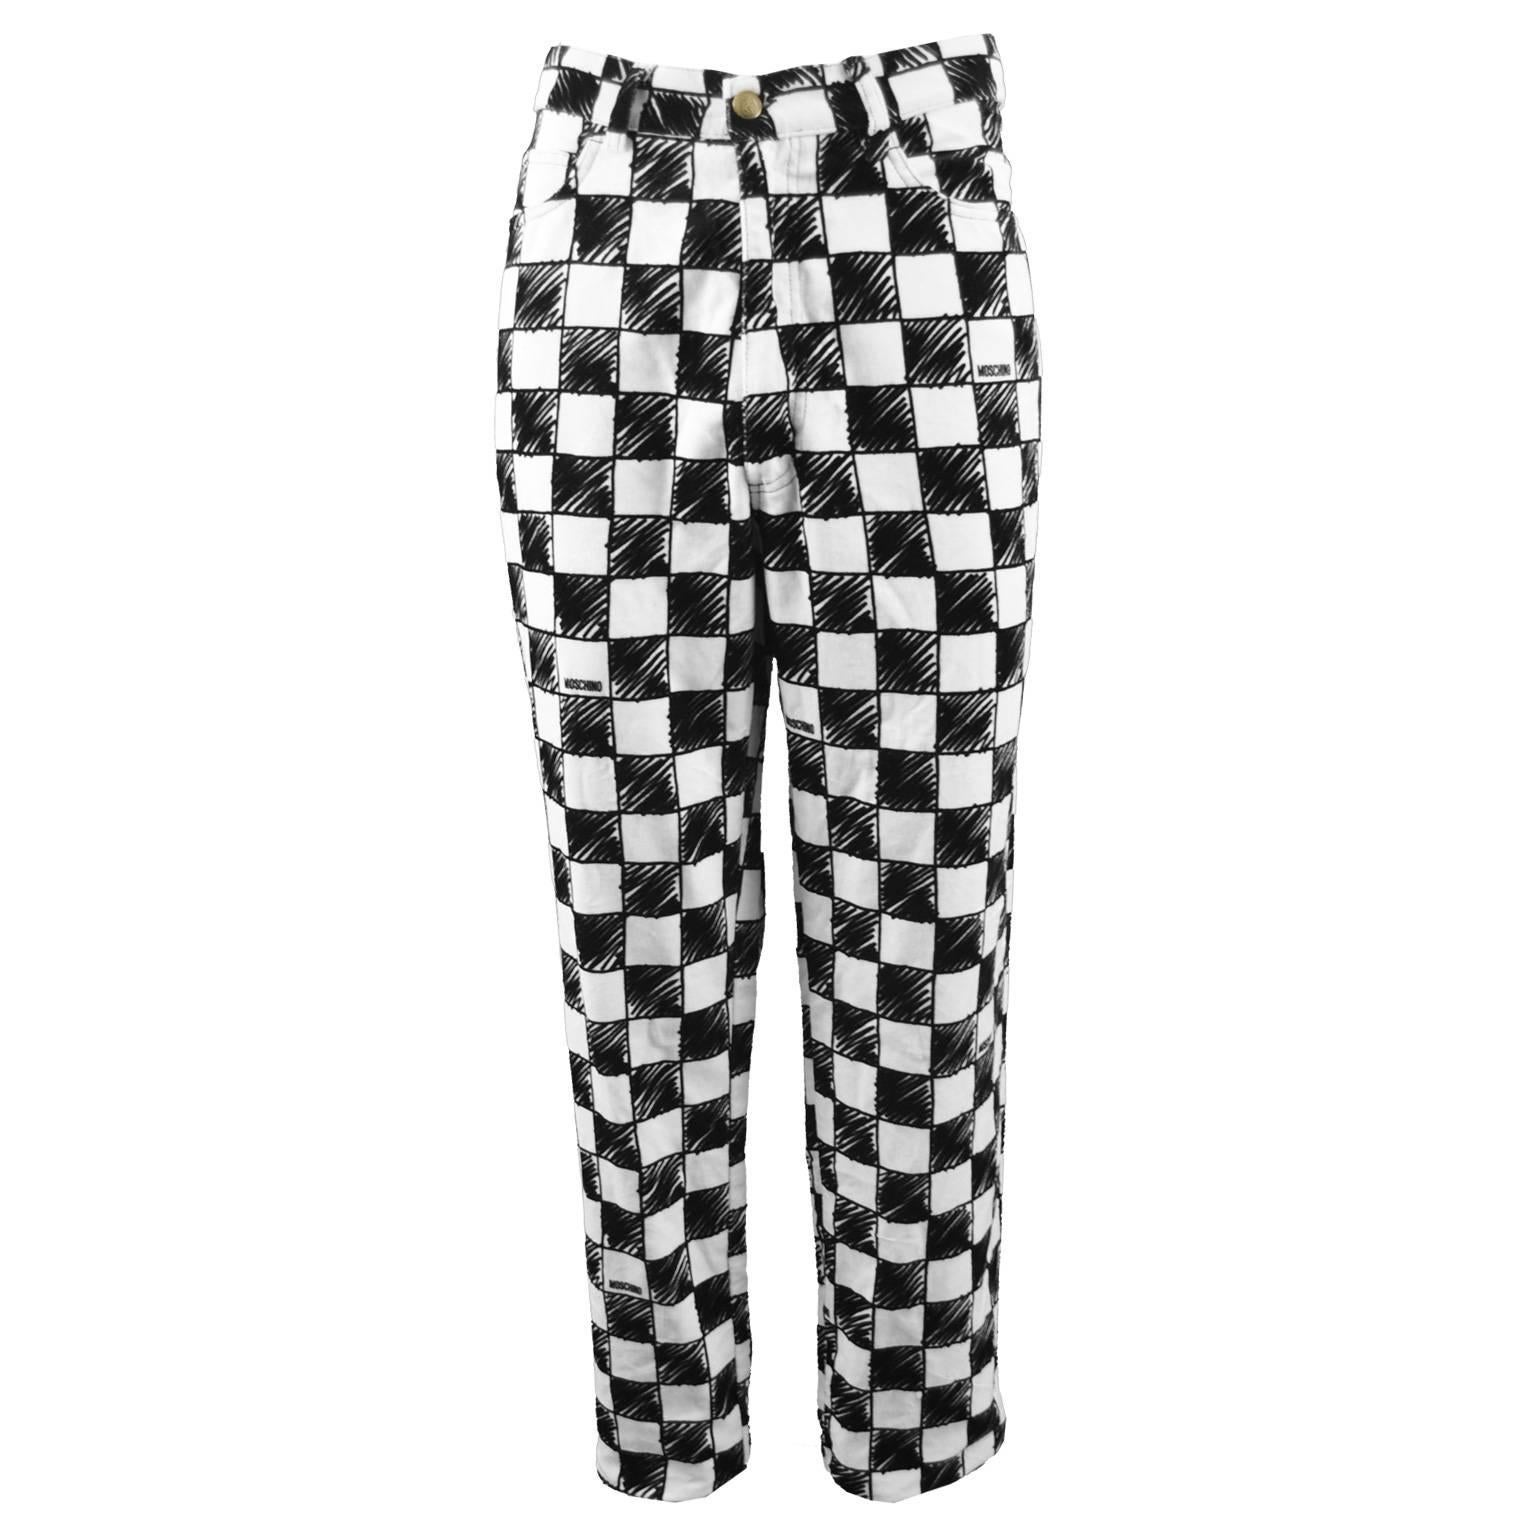 Moschino Men's Vintage Black and White Velvet Checkerboard Print Pants, 1990s For Sale 4